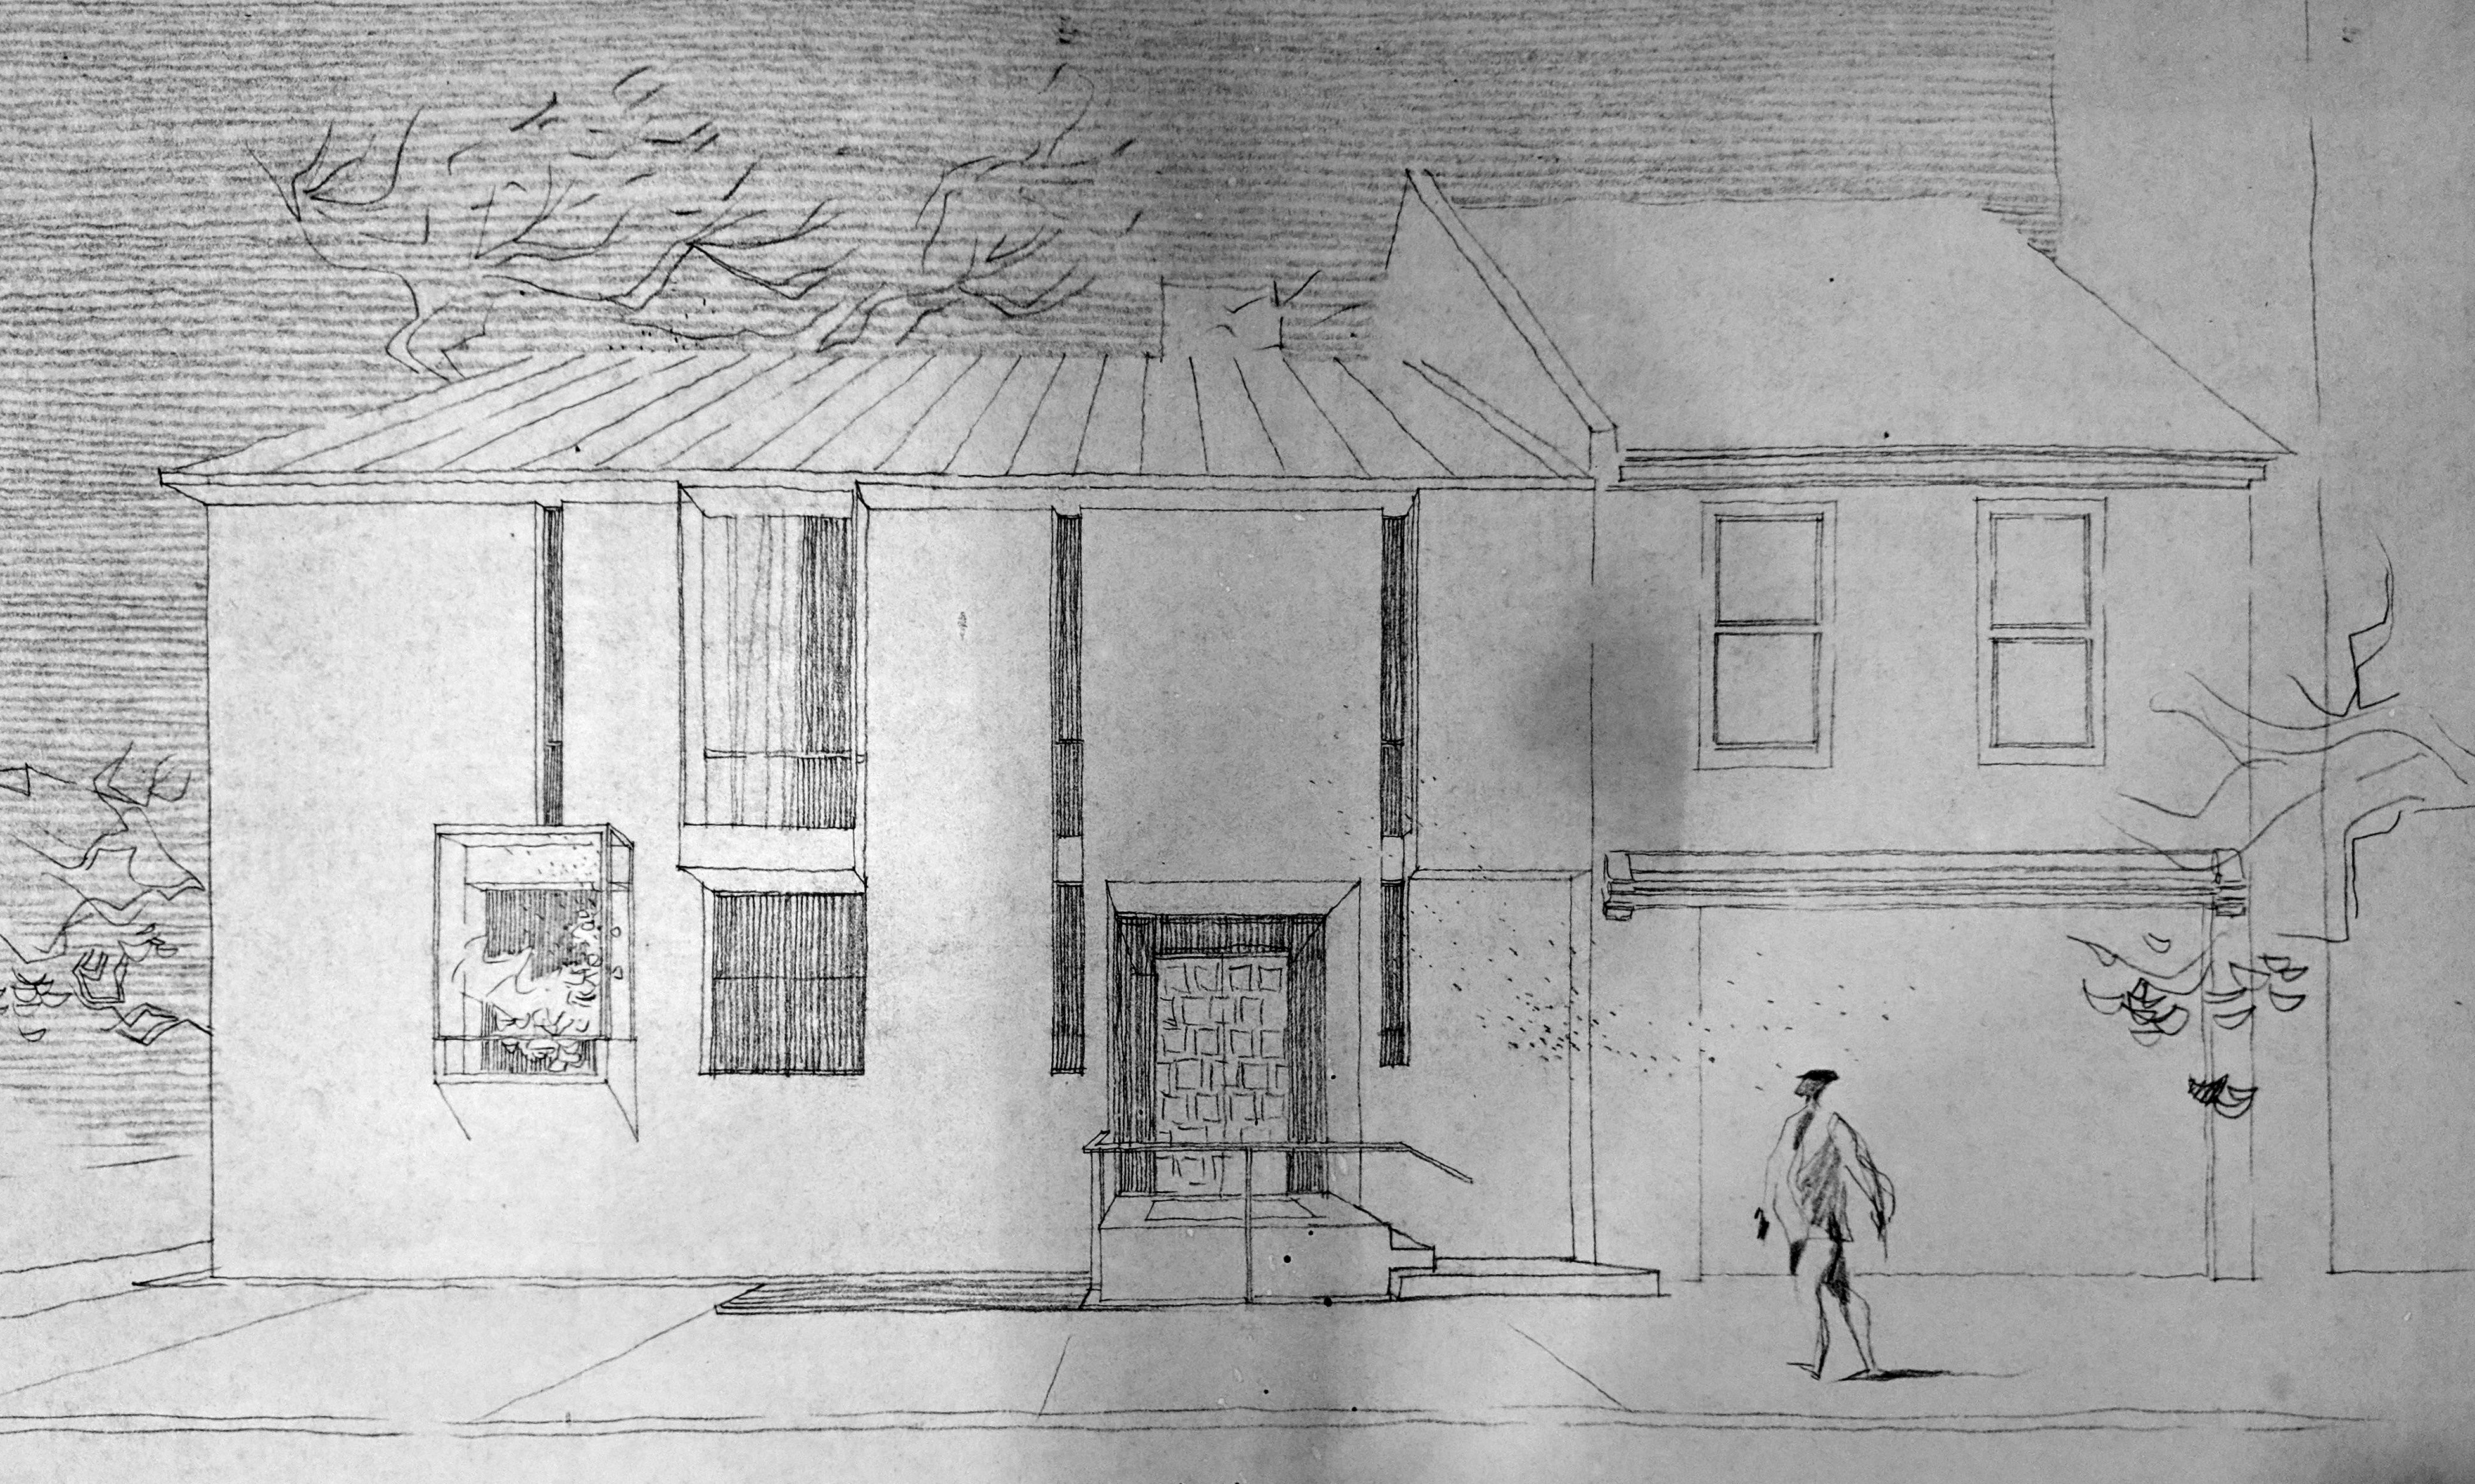 401 Cypress Street - Schematic S 4th St Elevation - Not Built (1966)